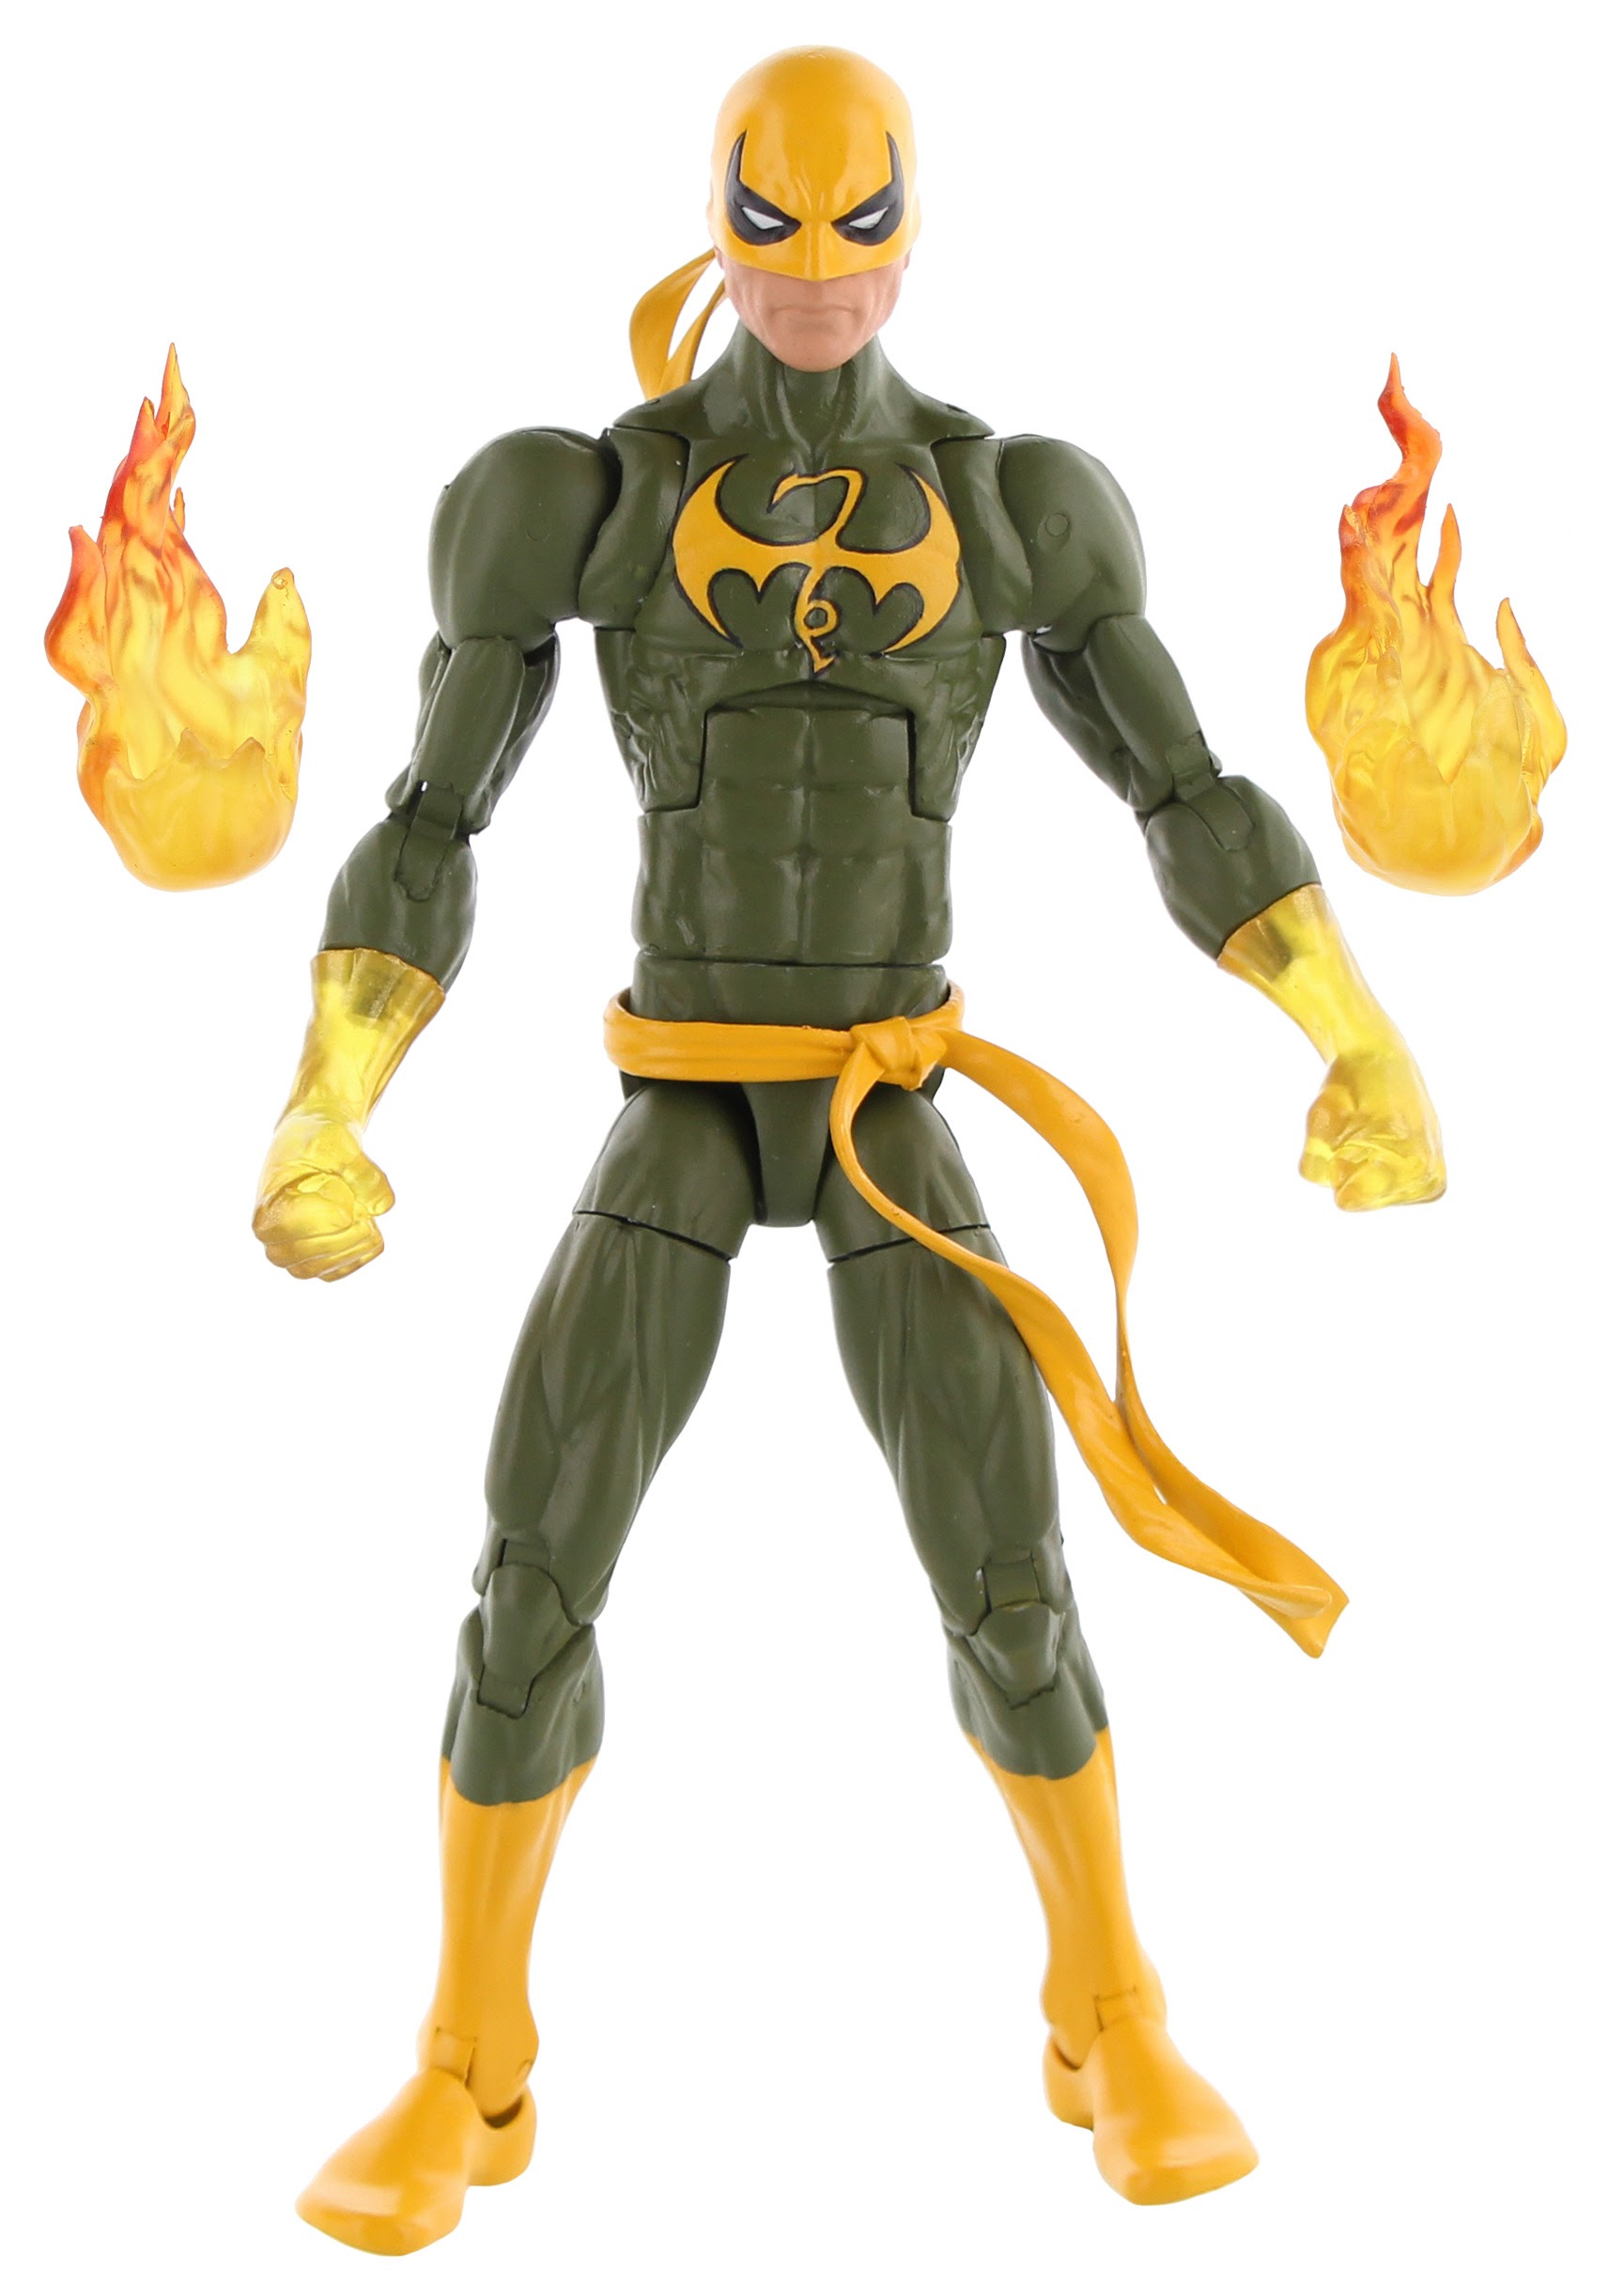 DS6InchIronFist Large 300DPI Large Batch of Hasbro Marvel & Star Wars Figure Images From Toy Fair